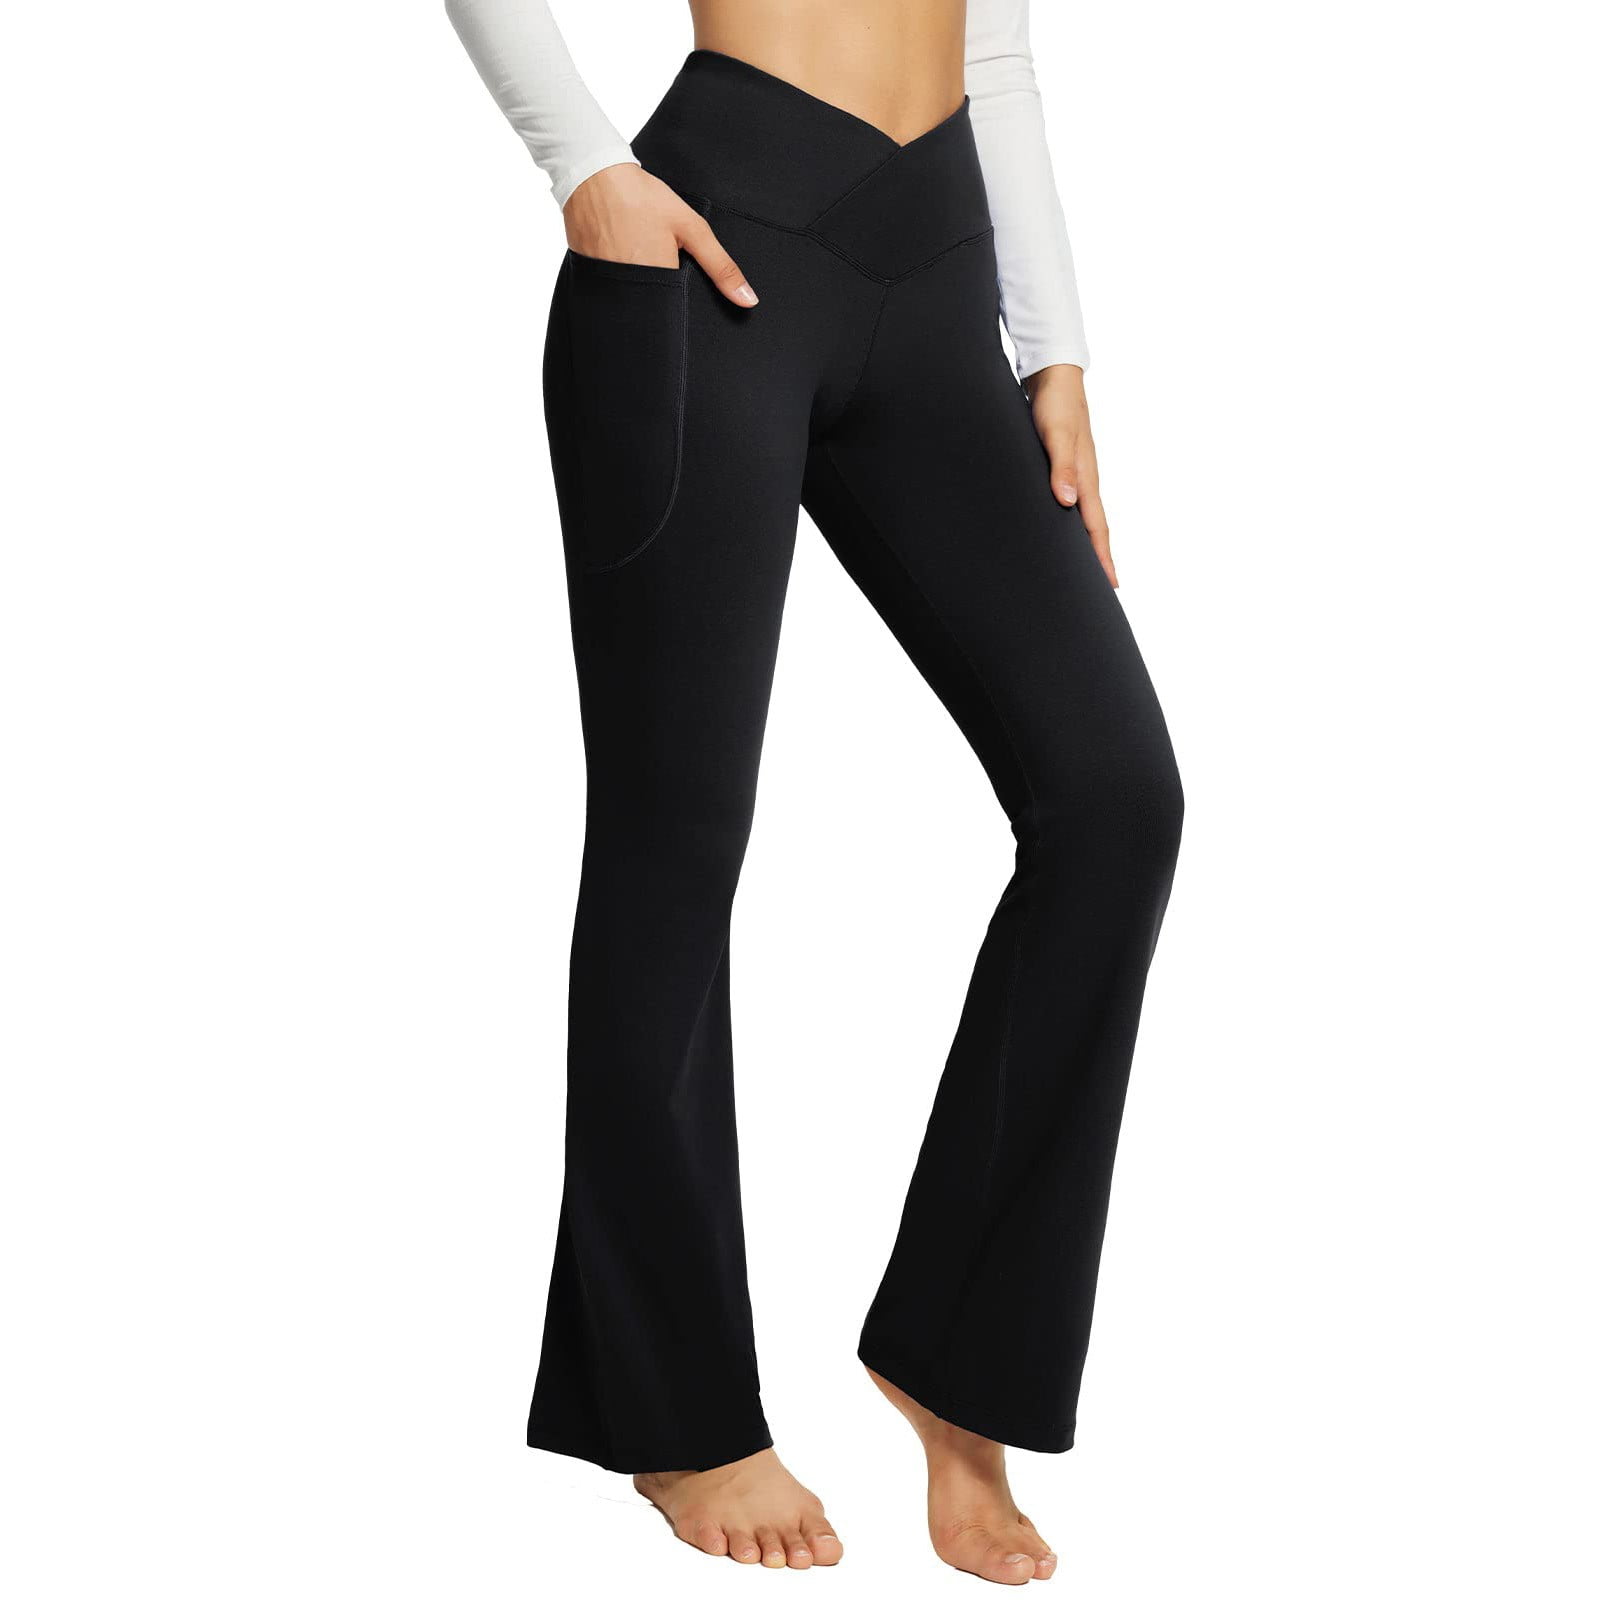 GETOUT Yoga Pants for Women Flare Leg Athletic Pants Fitness Running Out  Yoga Pants Cropped Flare Yoga Pants with Pockets